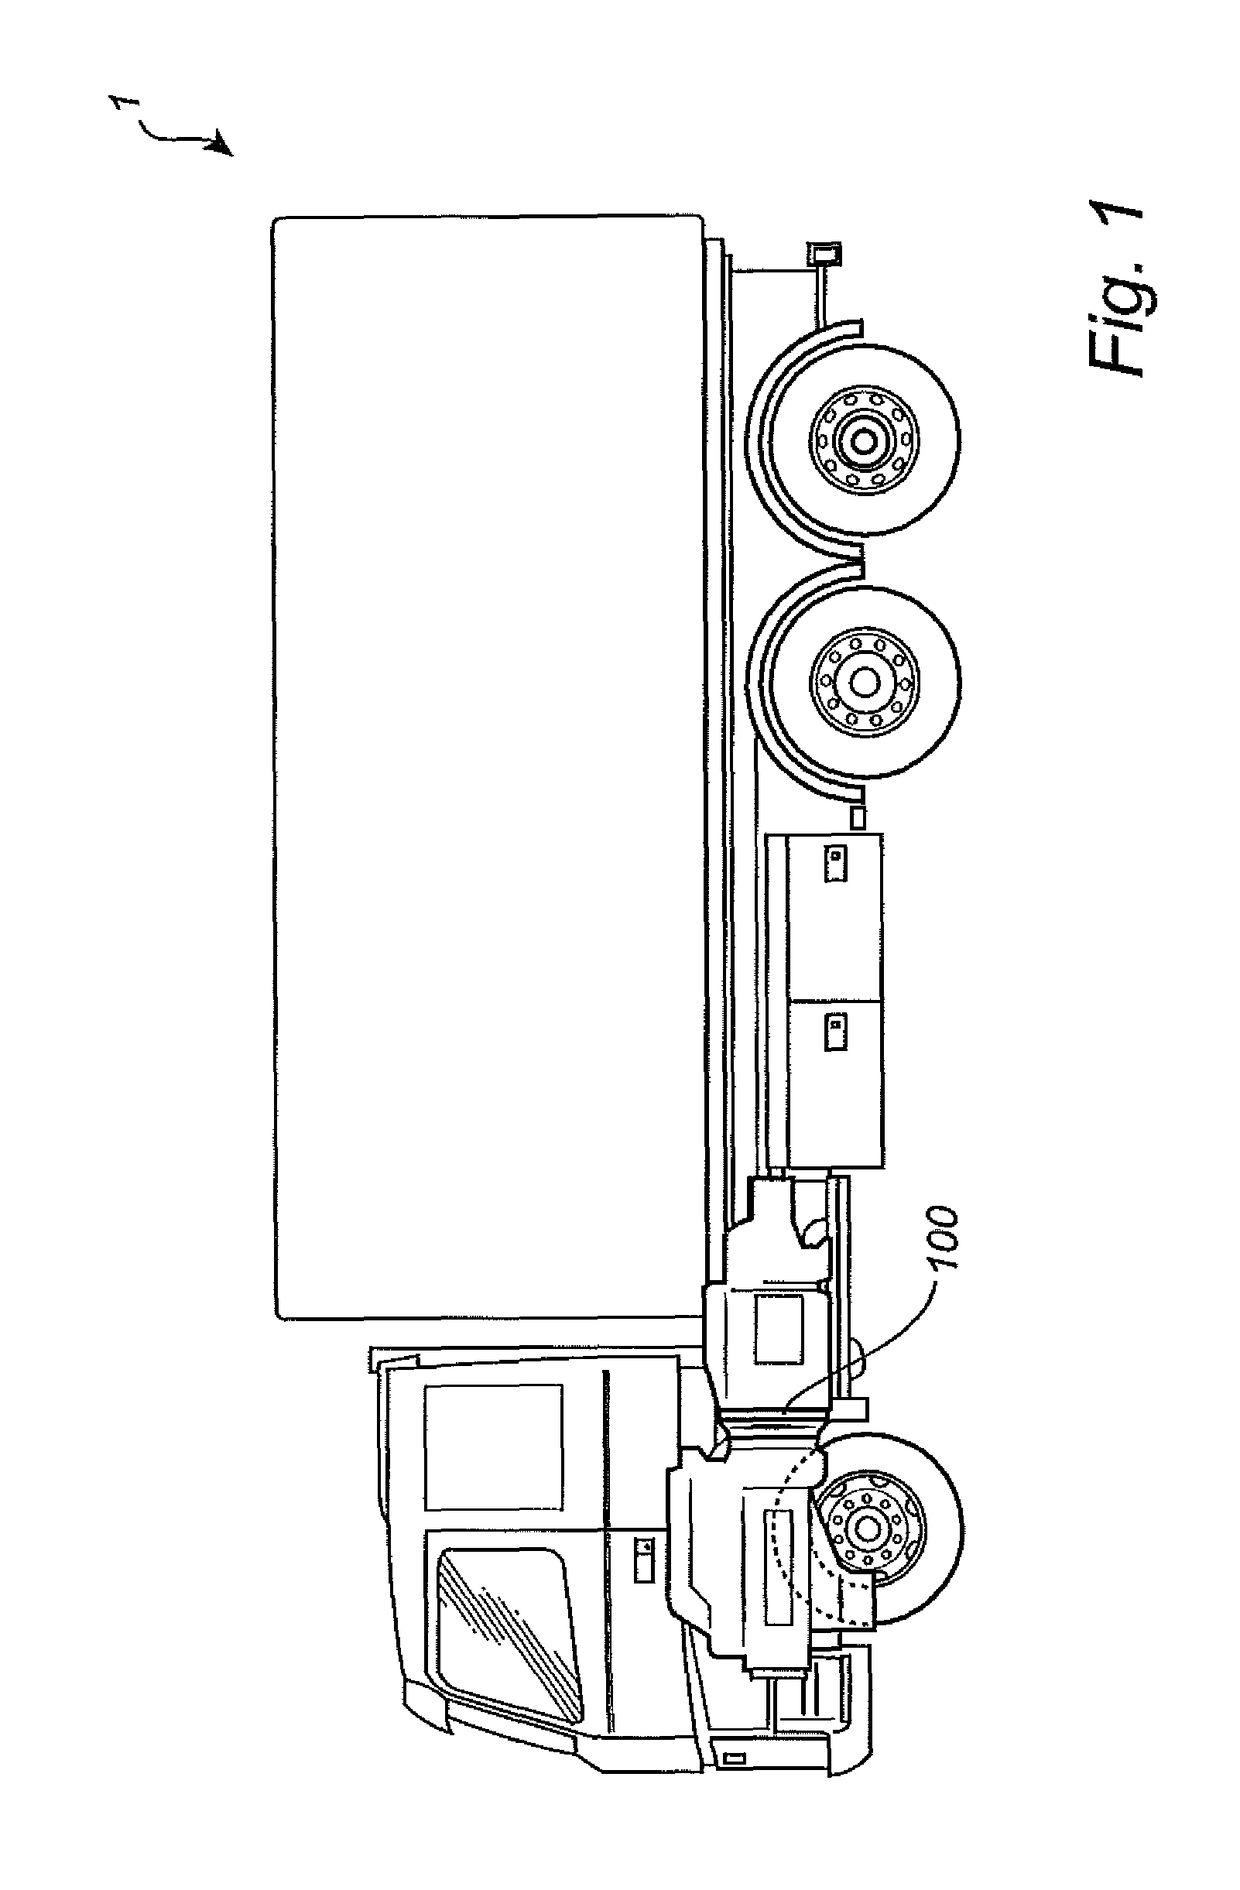 A method for controlling an actuator of a vehicle transmission